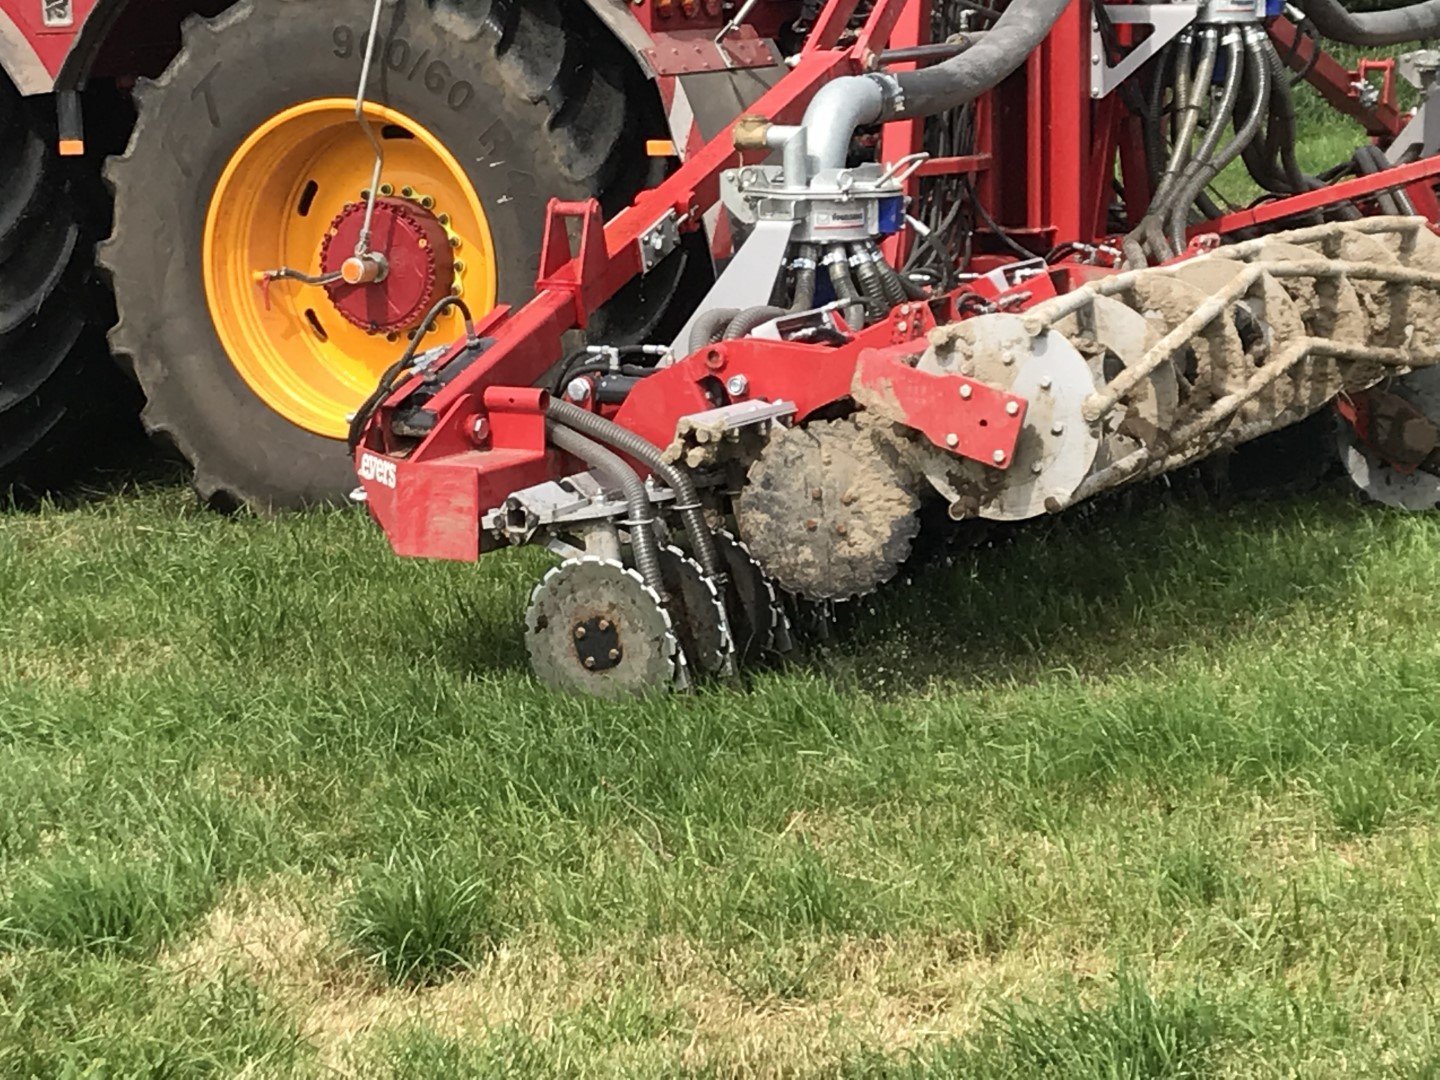 The Evers Tribus combi injector is suitable for fertilising grassland as well as arable land 